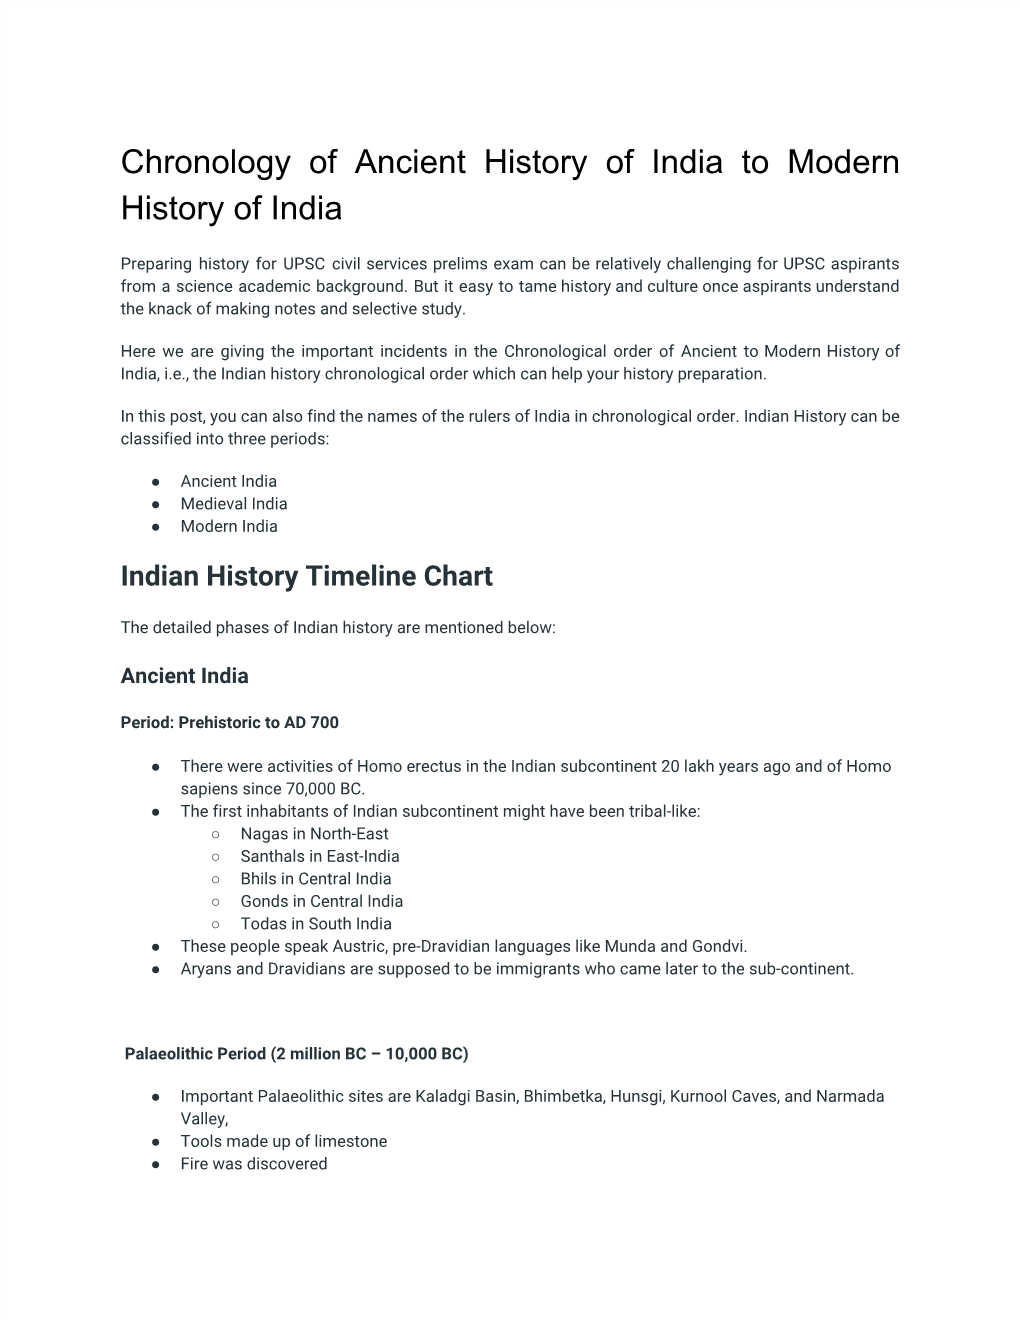 Chronology of Ancient History of India to Modern History of India